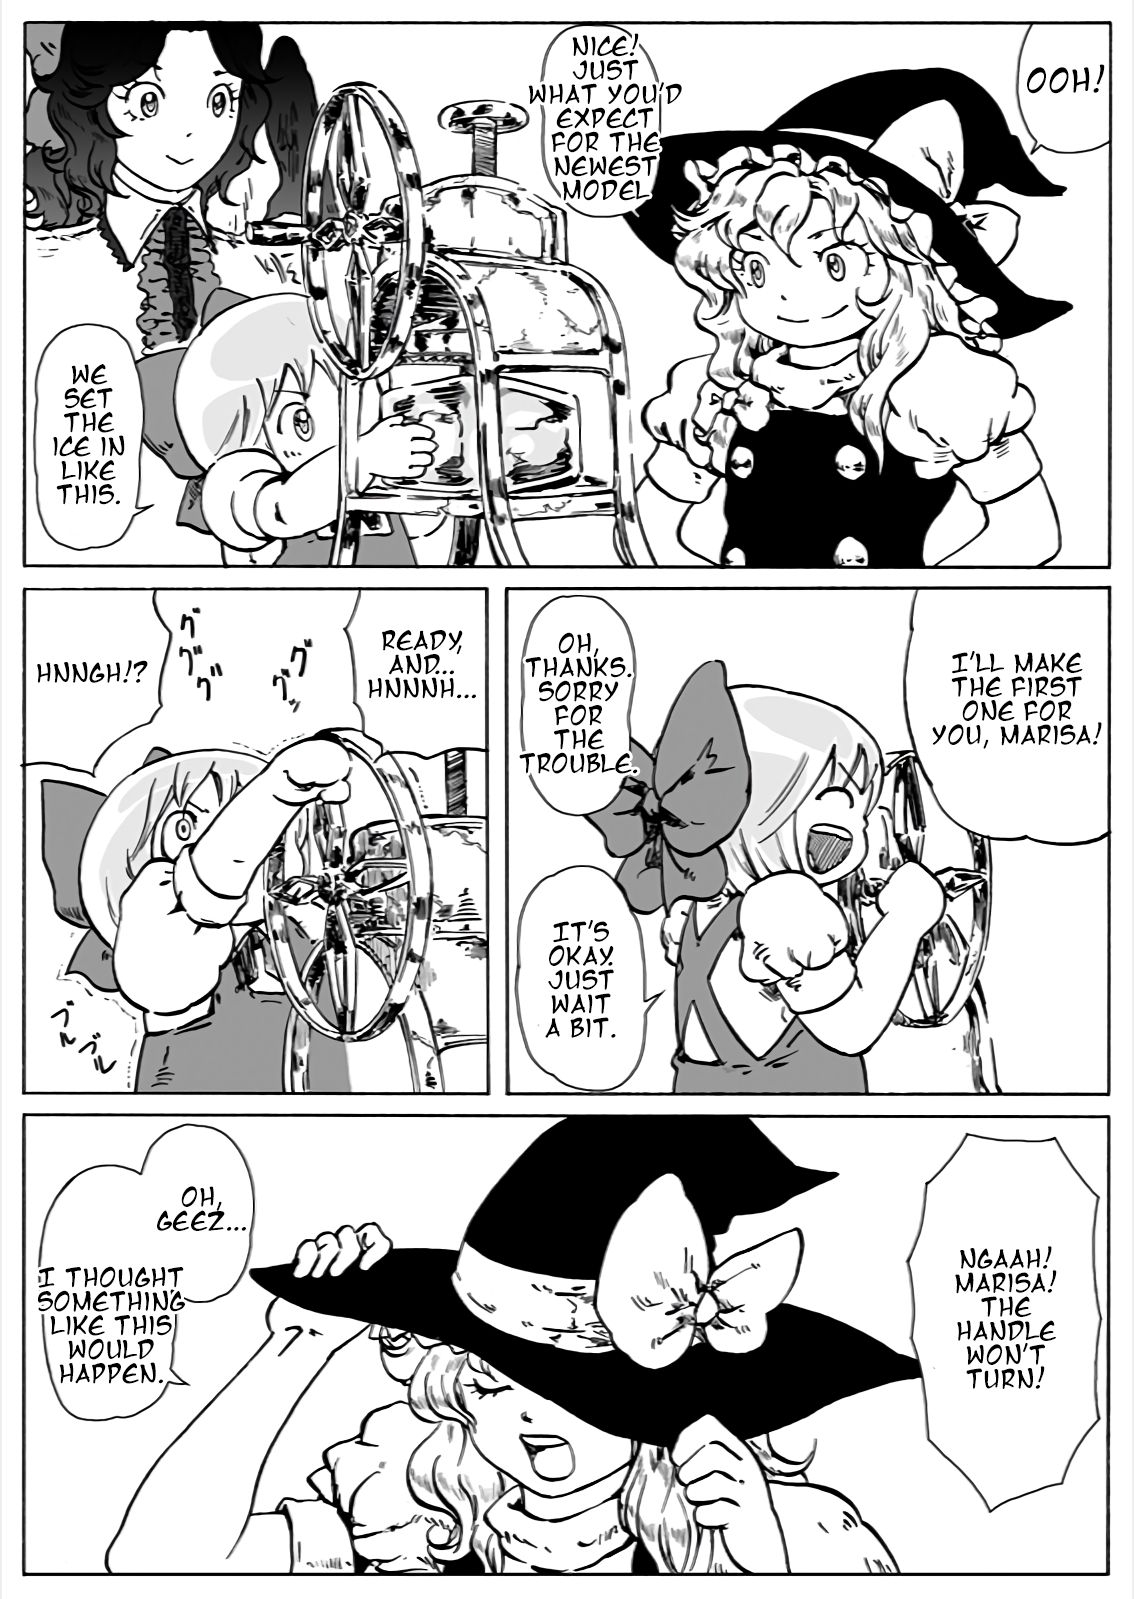 [YSYSTUDIO ((YsY)s)] Cirno Tenchou | Cirno the Stall Manager (Touhou Project) [English] [Digital] 16